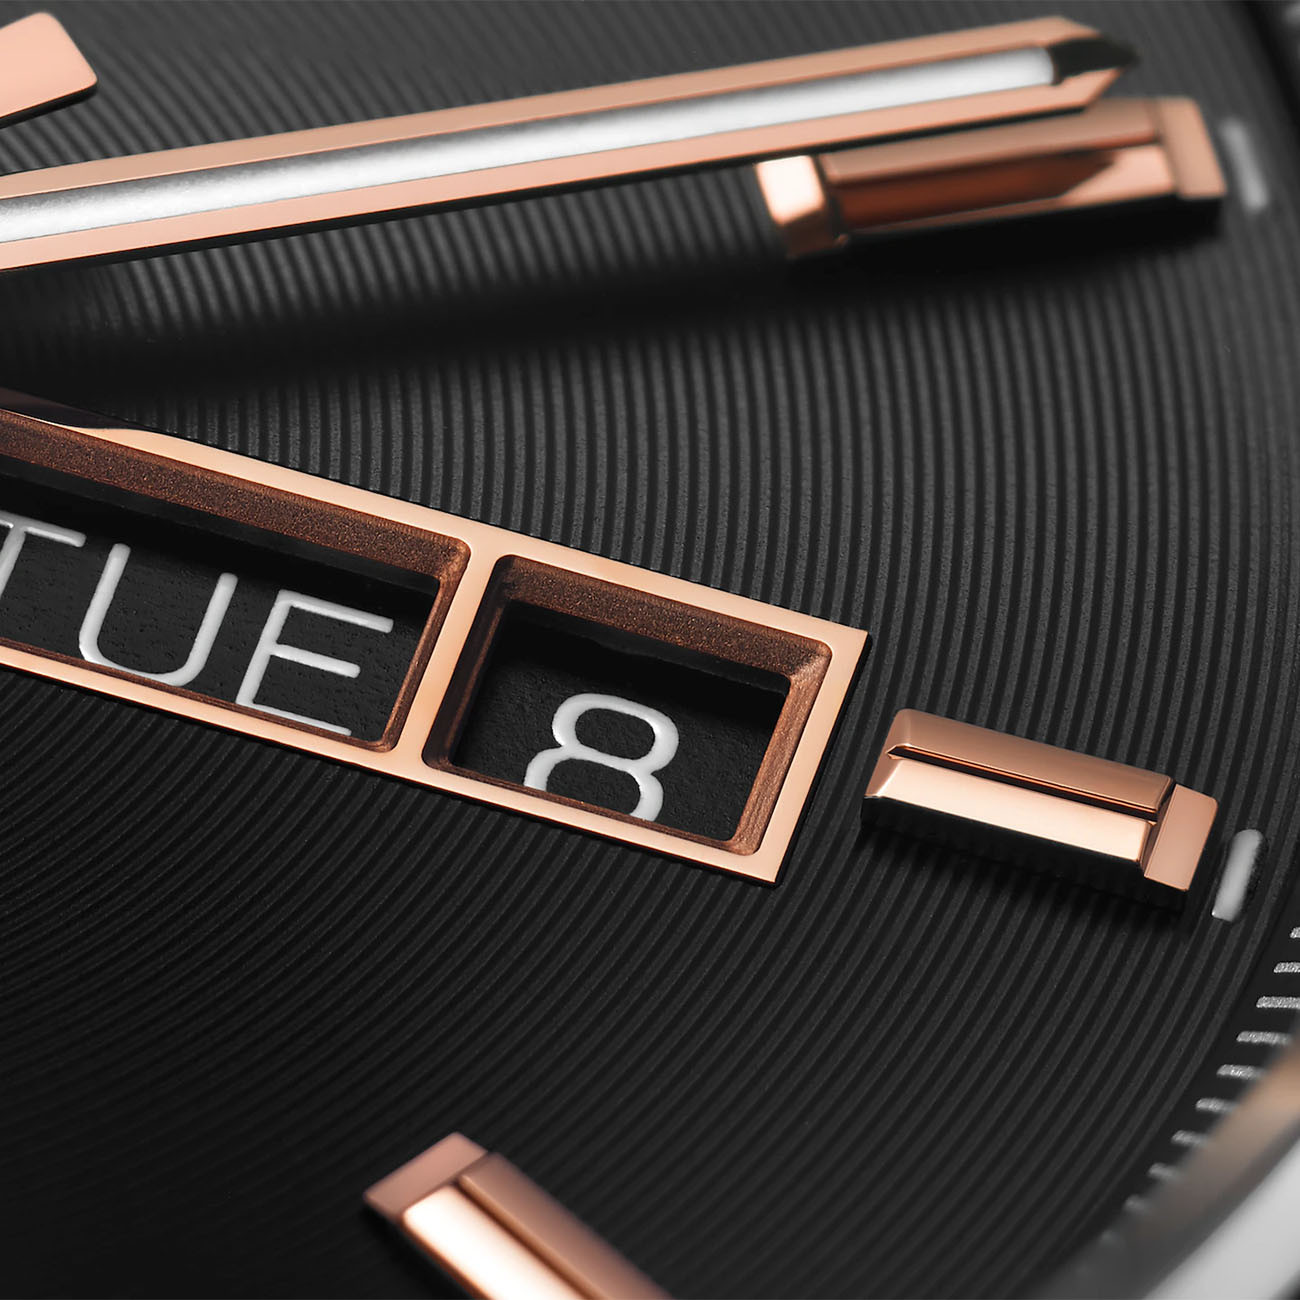 Tag Heuer Carrera Calibre 5 Day-Date Black and Rose Gold Dial Watch Closeup